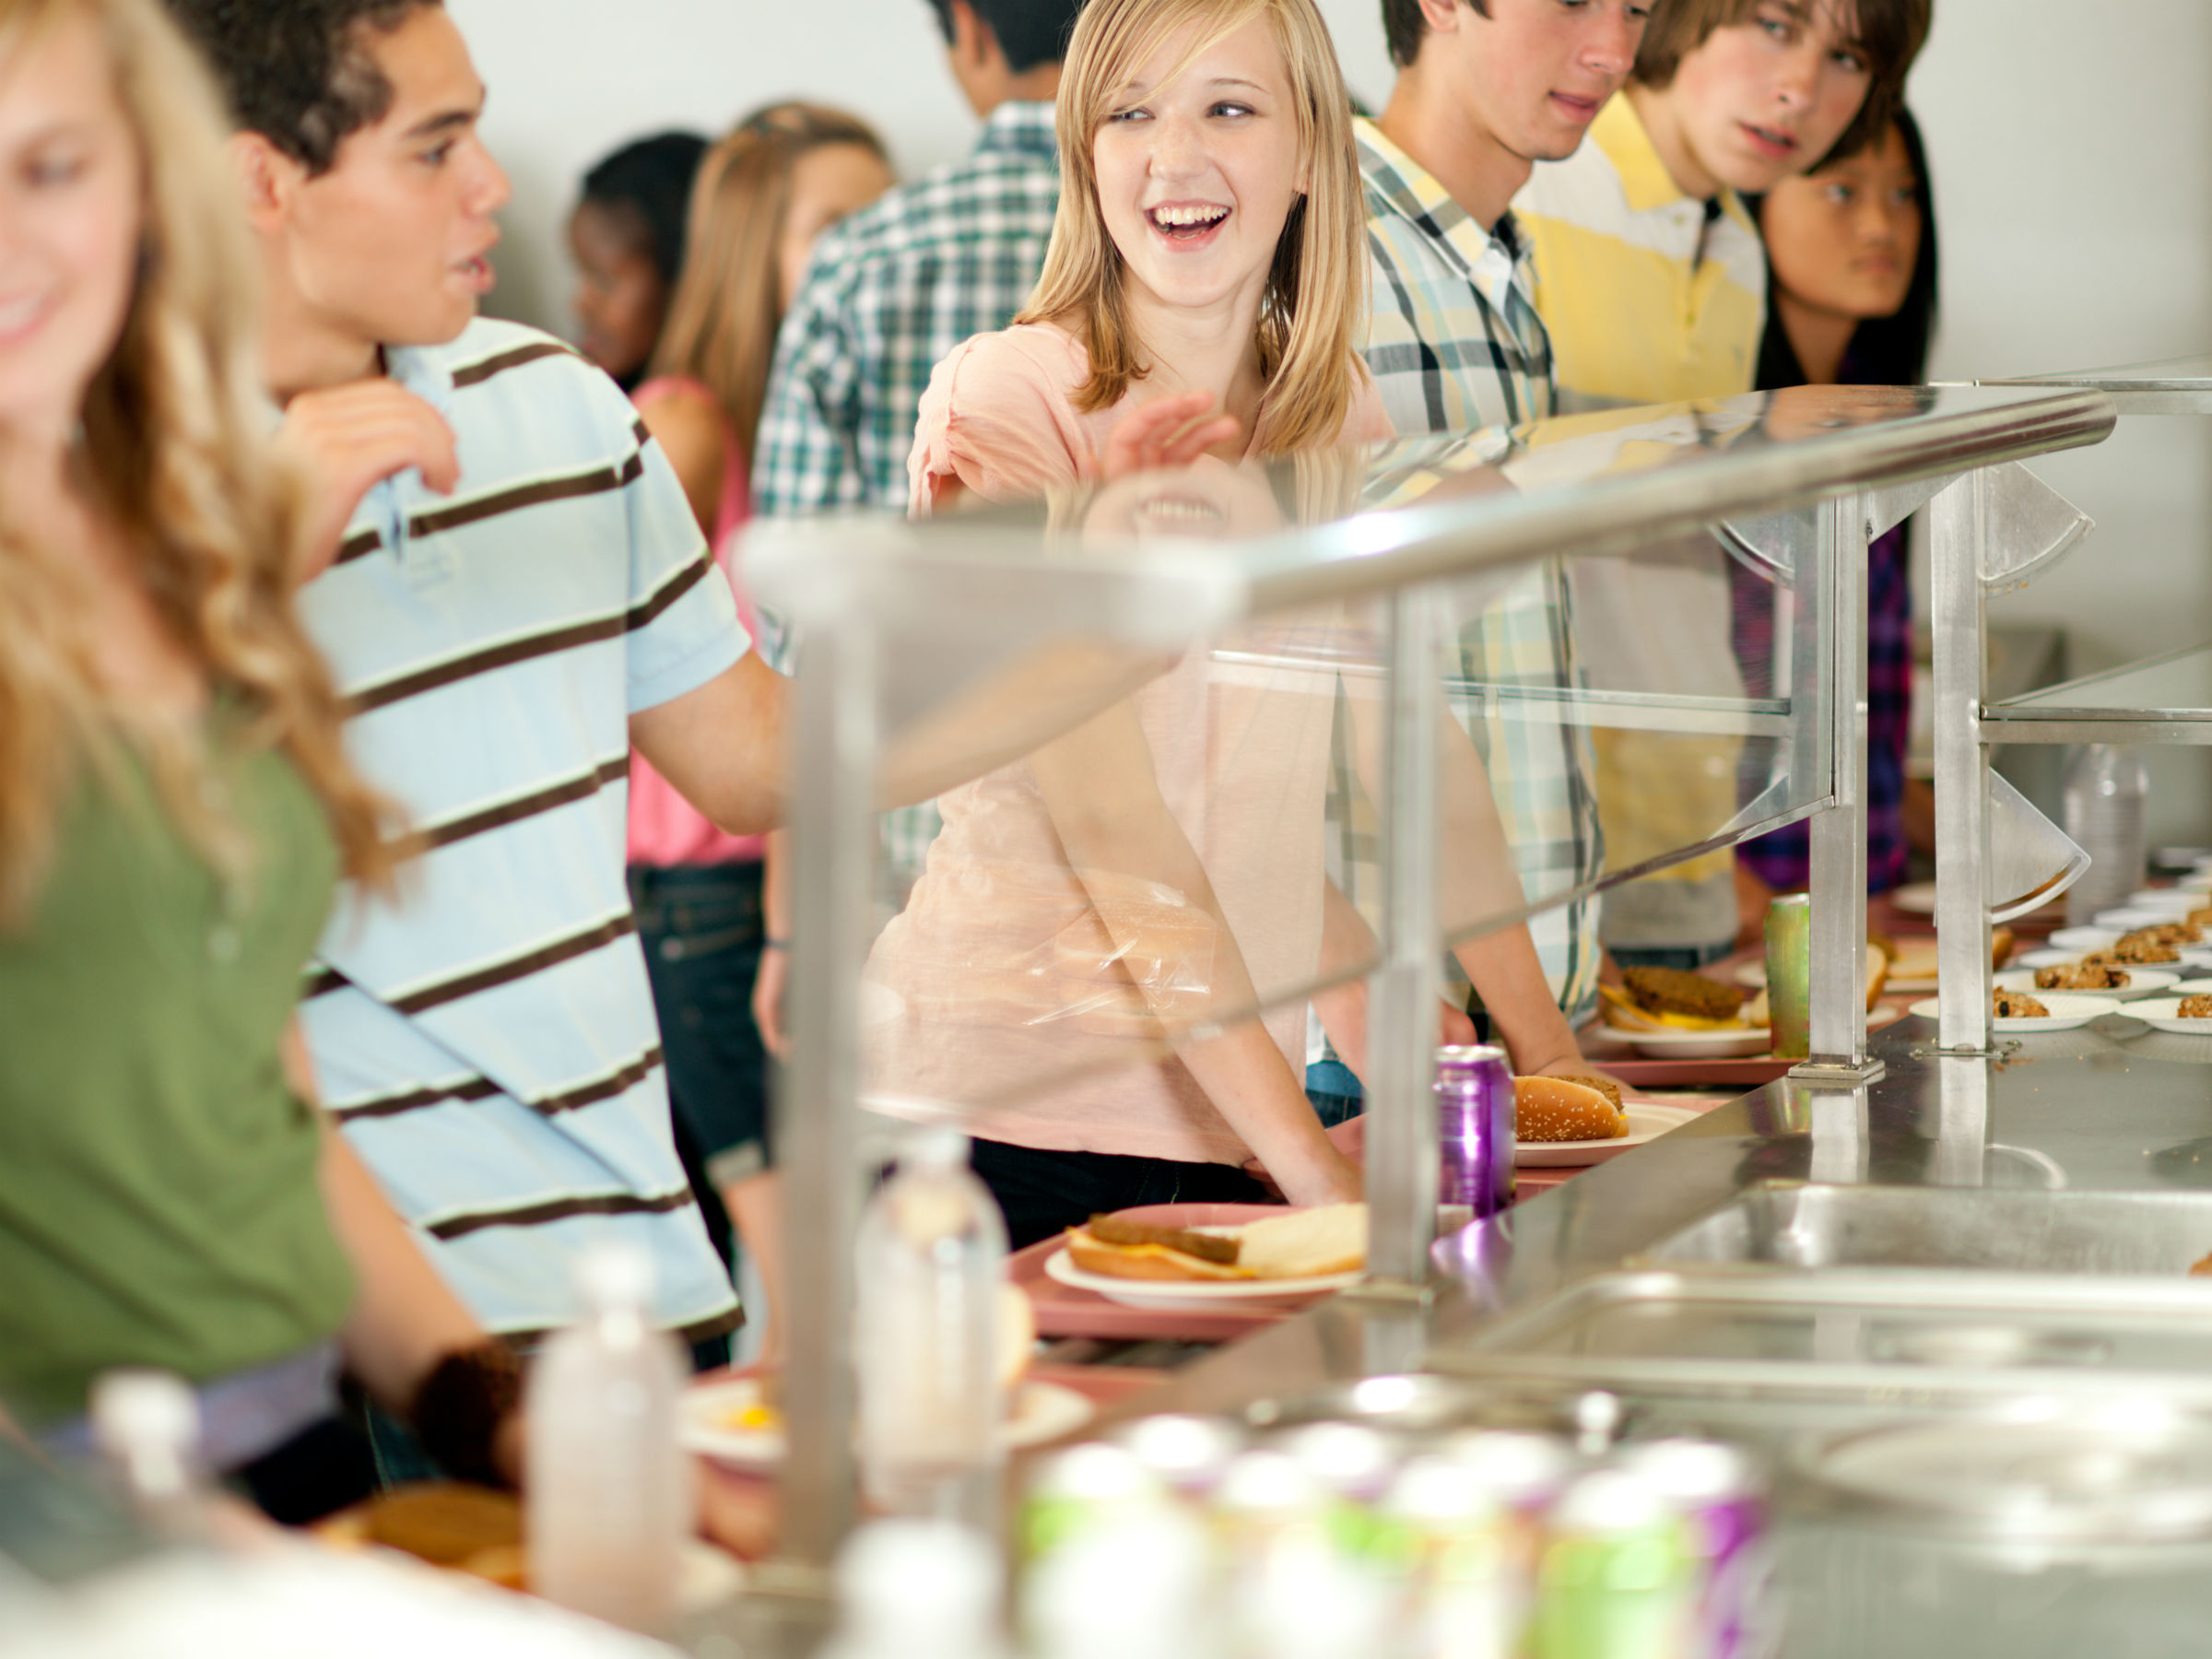 Students waiting in line in cafeteria